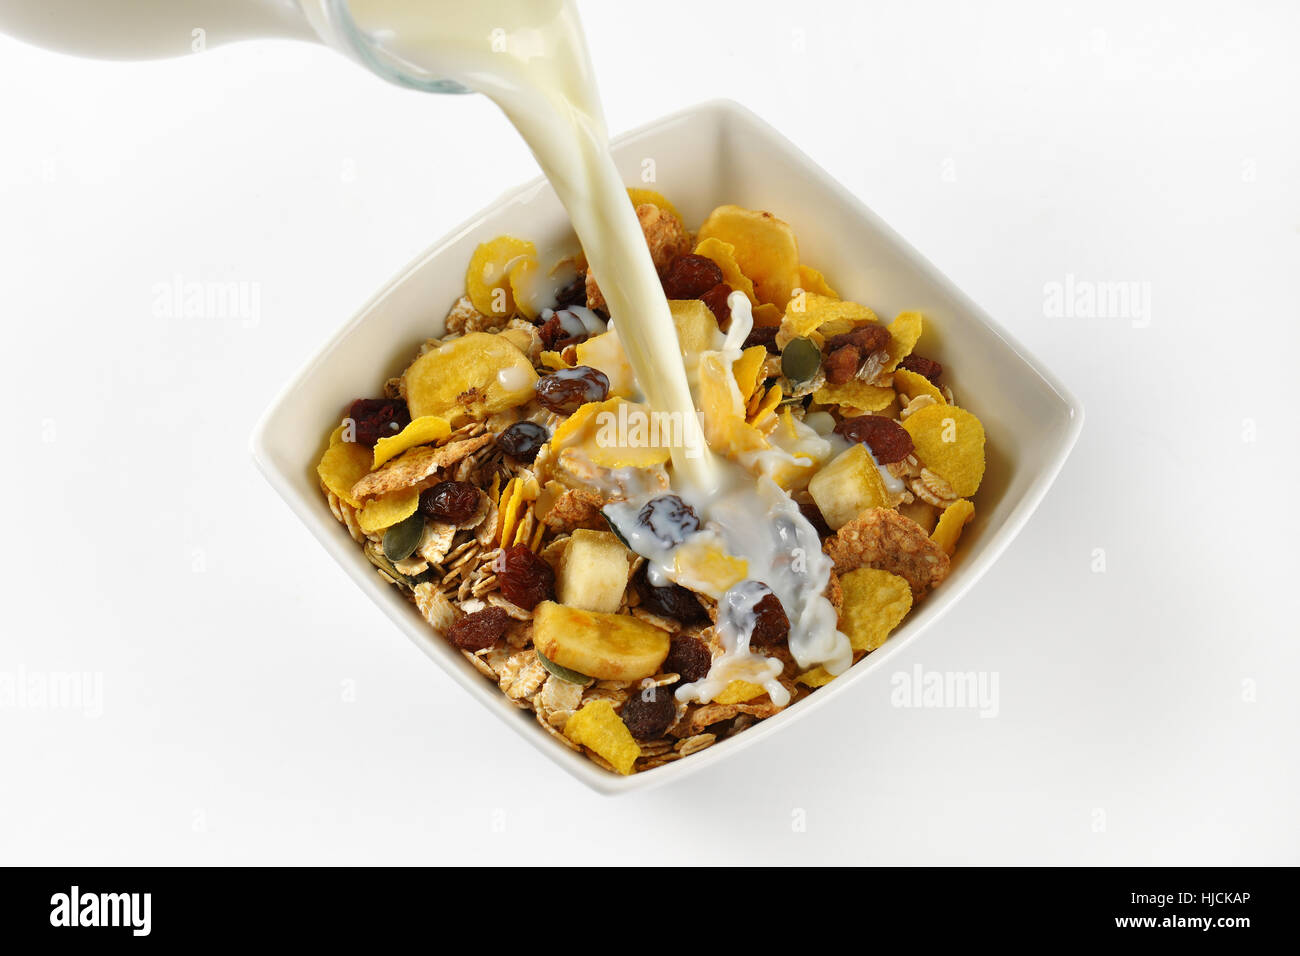 https://c8.alamy.com/comp/HJCKAP/milk-pouring-into-bowl-of-corn-flakes-and-cereals-on-white-background-HJCKAP.jpg